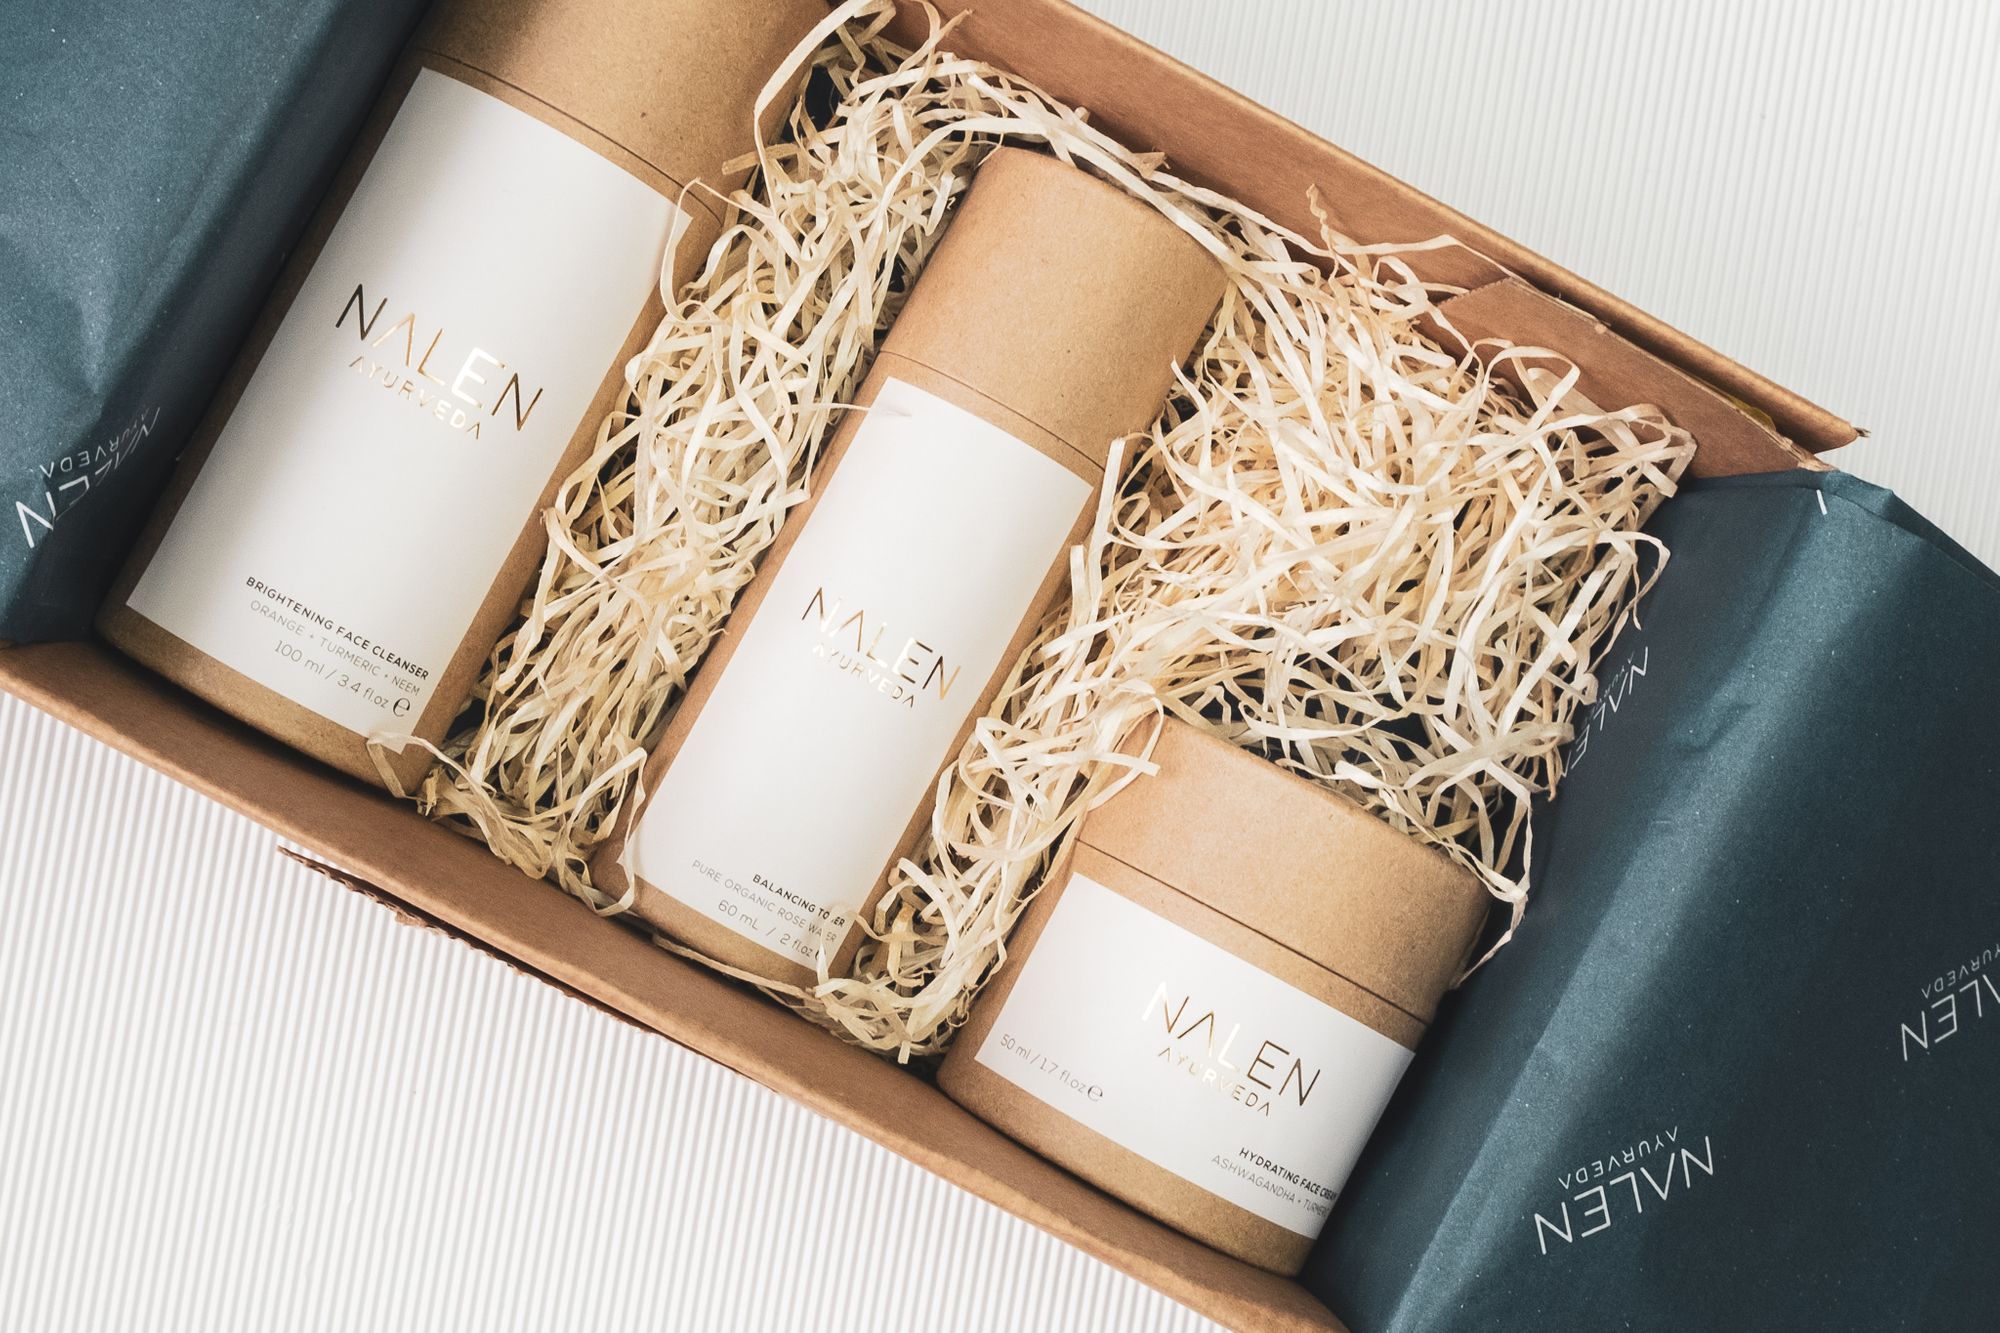 16 Beauty Products with Smart, Eco-Friendly Packaging - NewBeauty